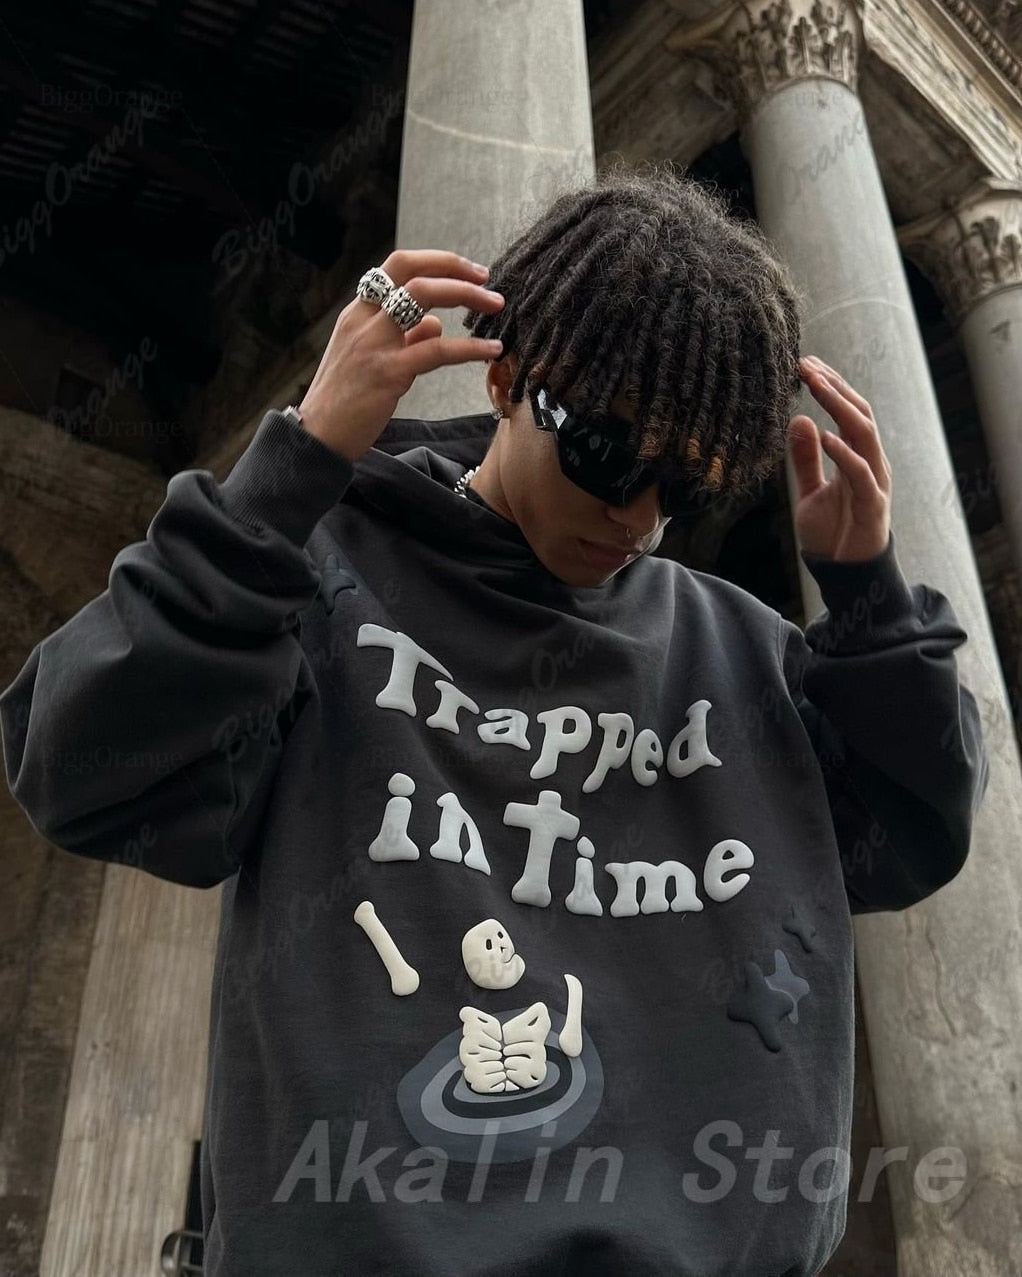 Trapped in Time Hoody - Print Hoodies Oversized Streetwear Men High Quality Cotton Liner Sweatshirt Top Y2k sweater jumper - DITCHWORLD